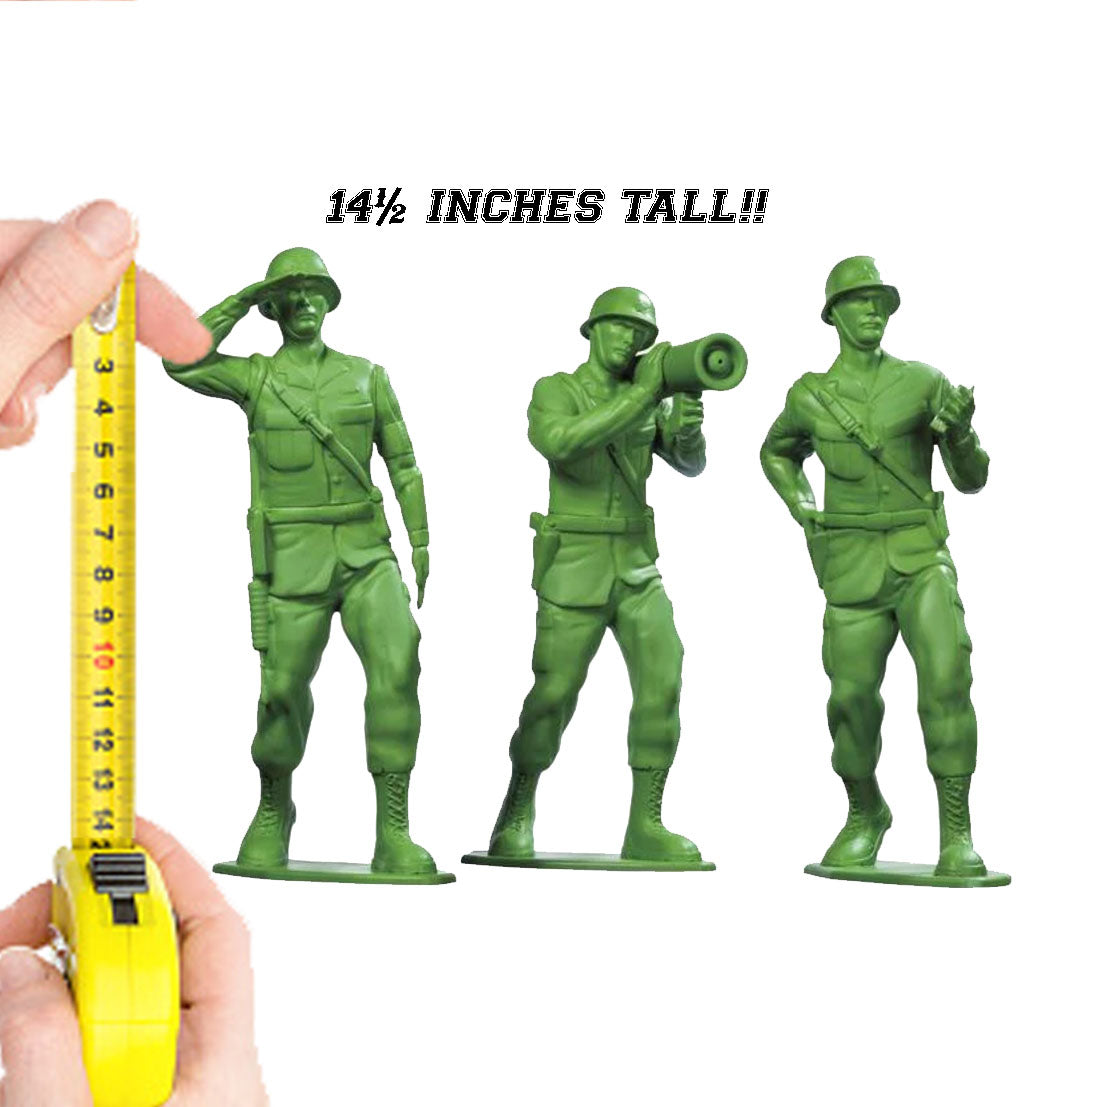 Epic Army Man "Salute" 14.5" Toy Figure, Large Toy Soldiers 🪖📏